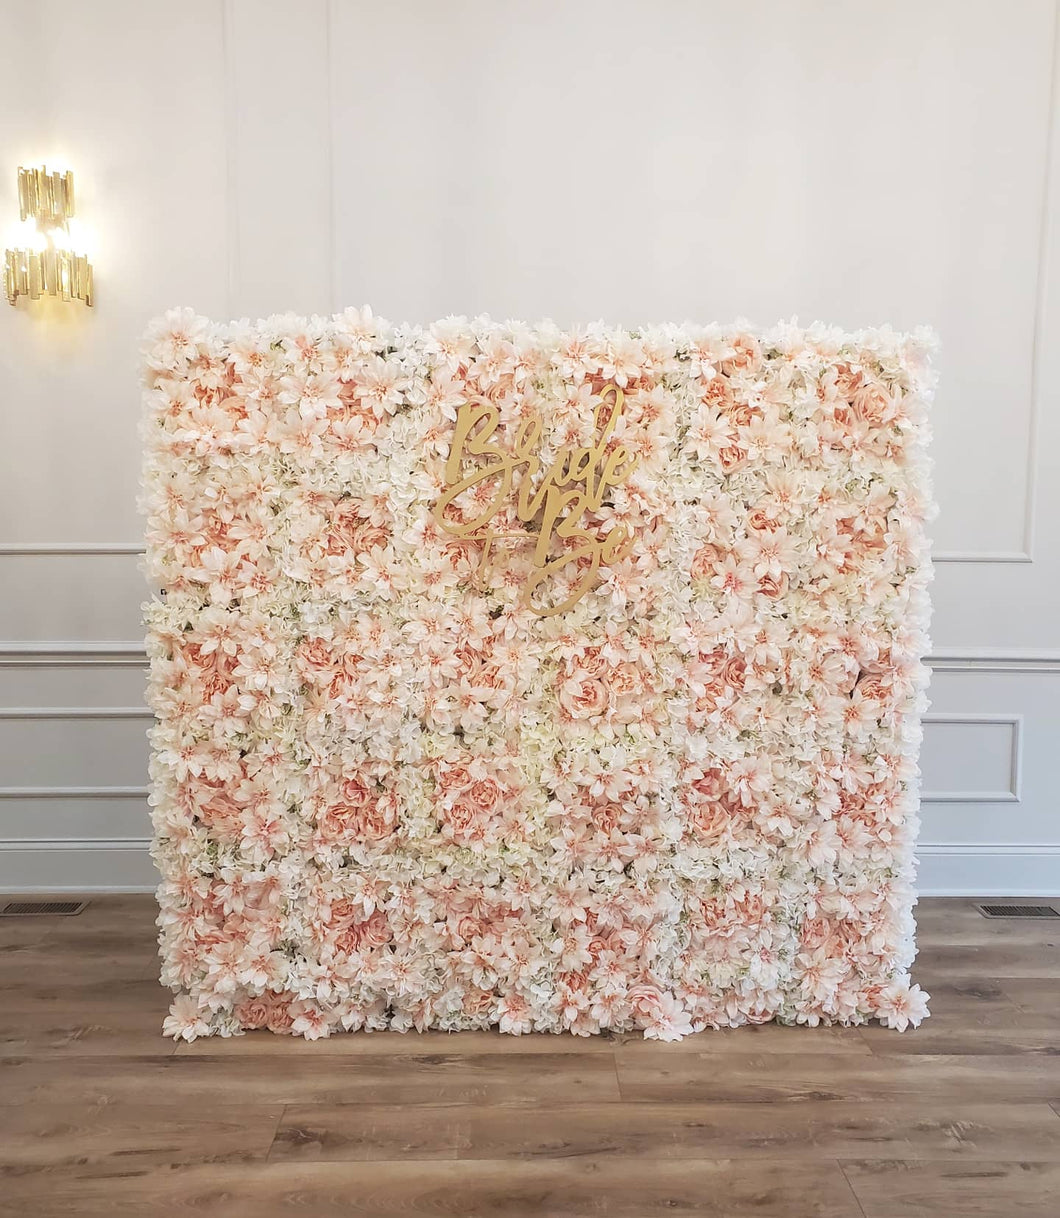 6ft*6ft Pink and White Floral Wall